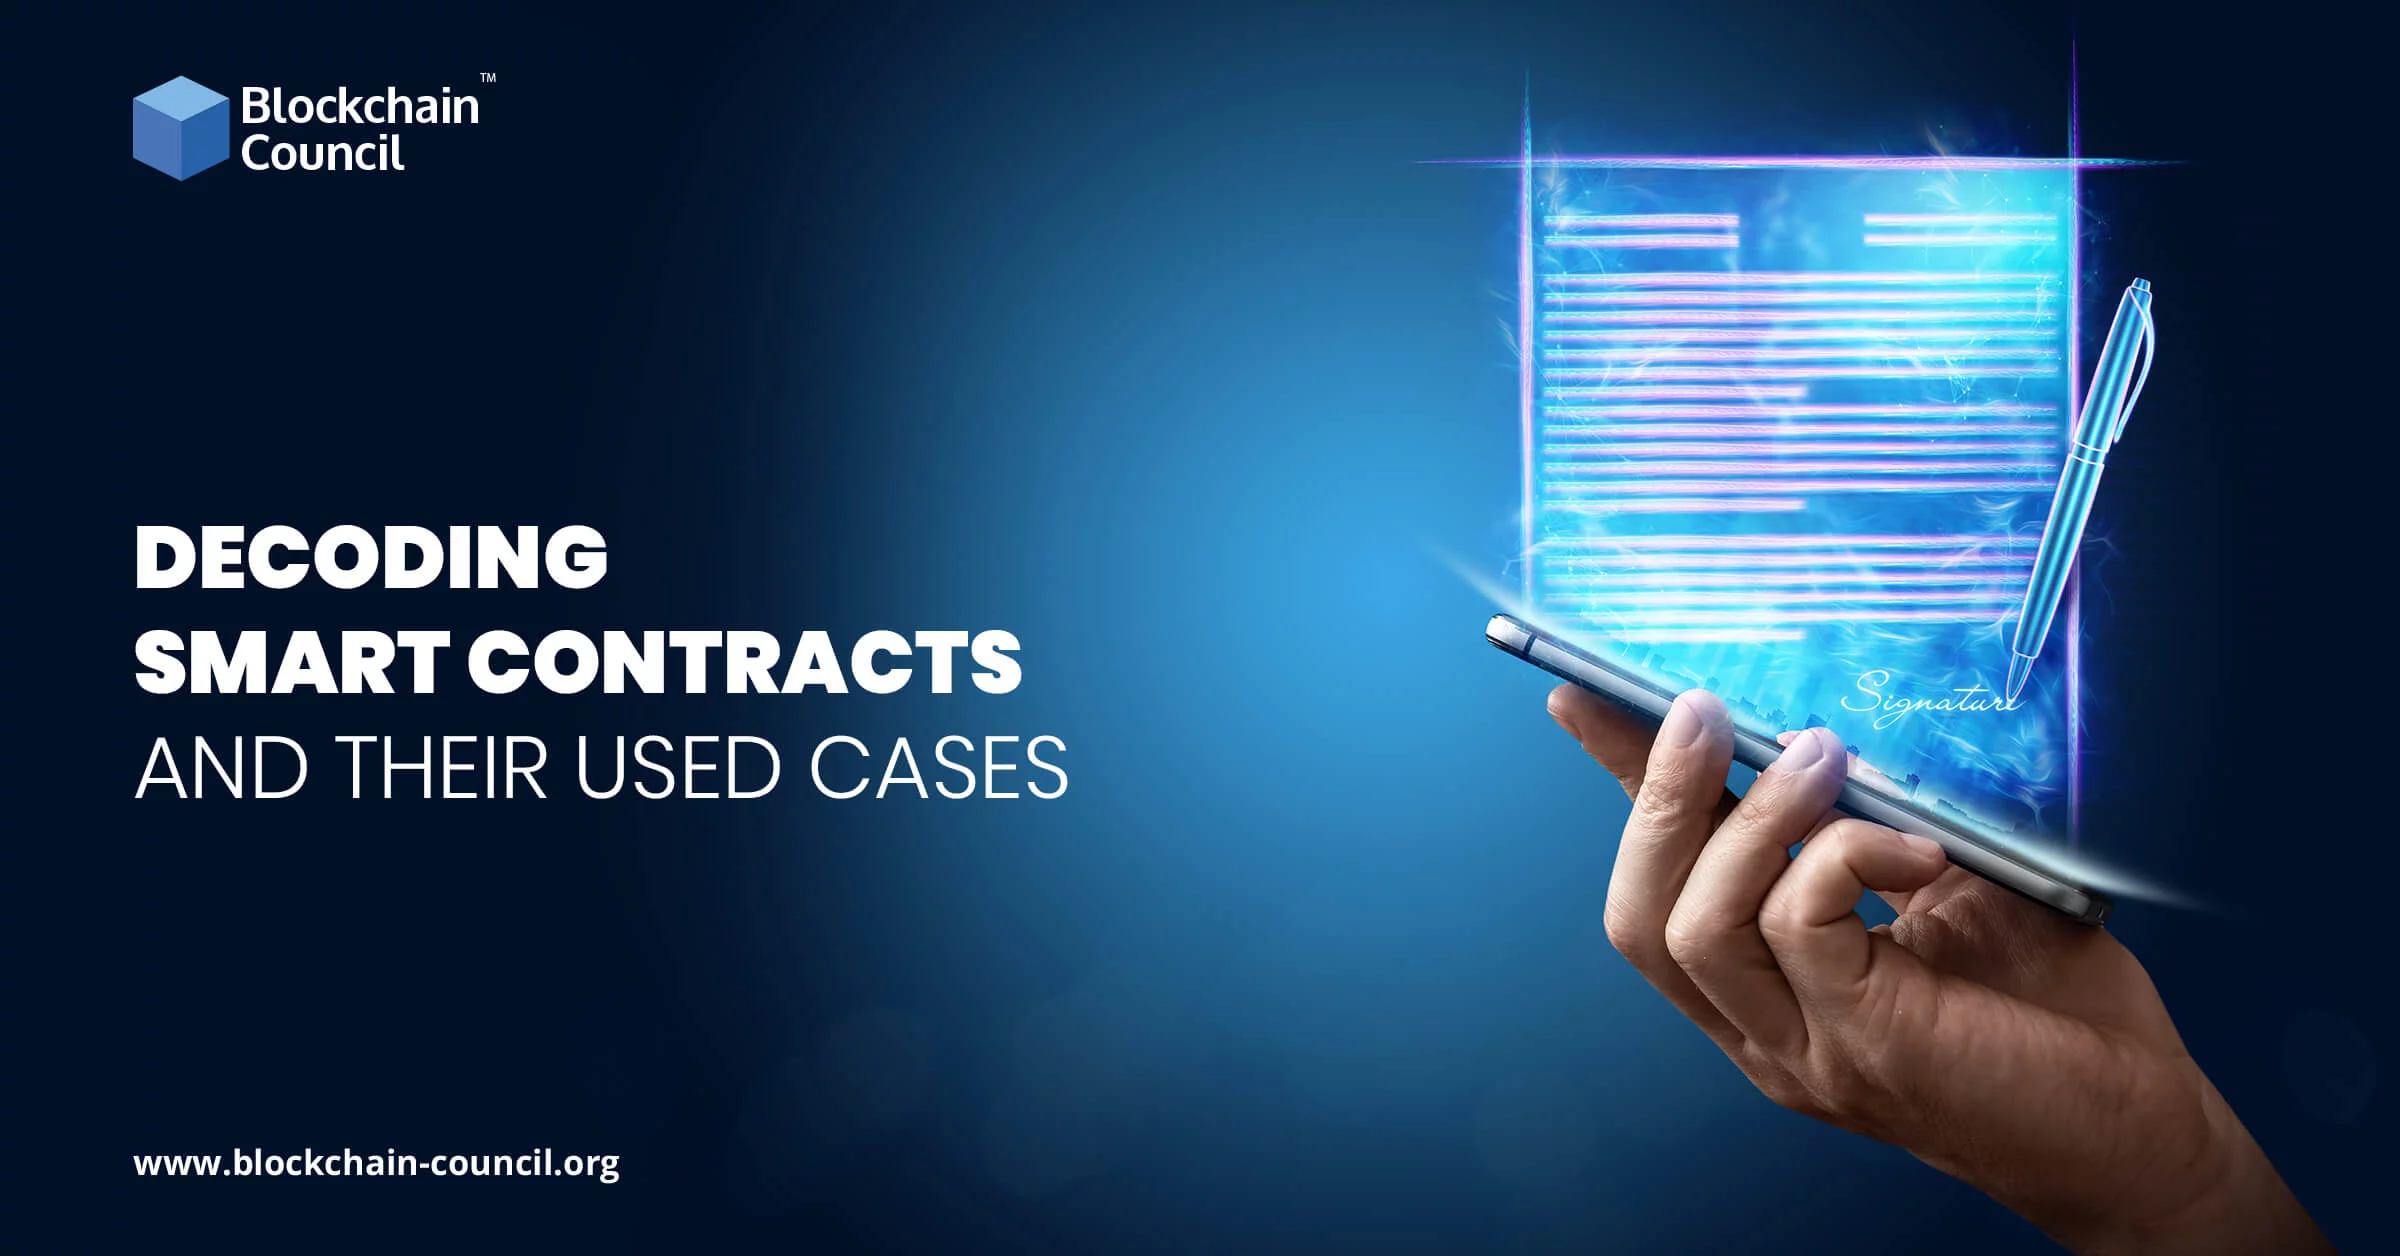 Decoding Smart Contracts and their used cases